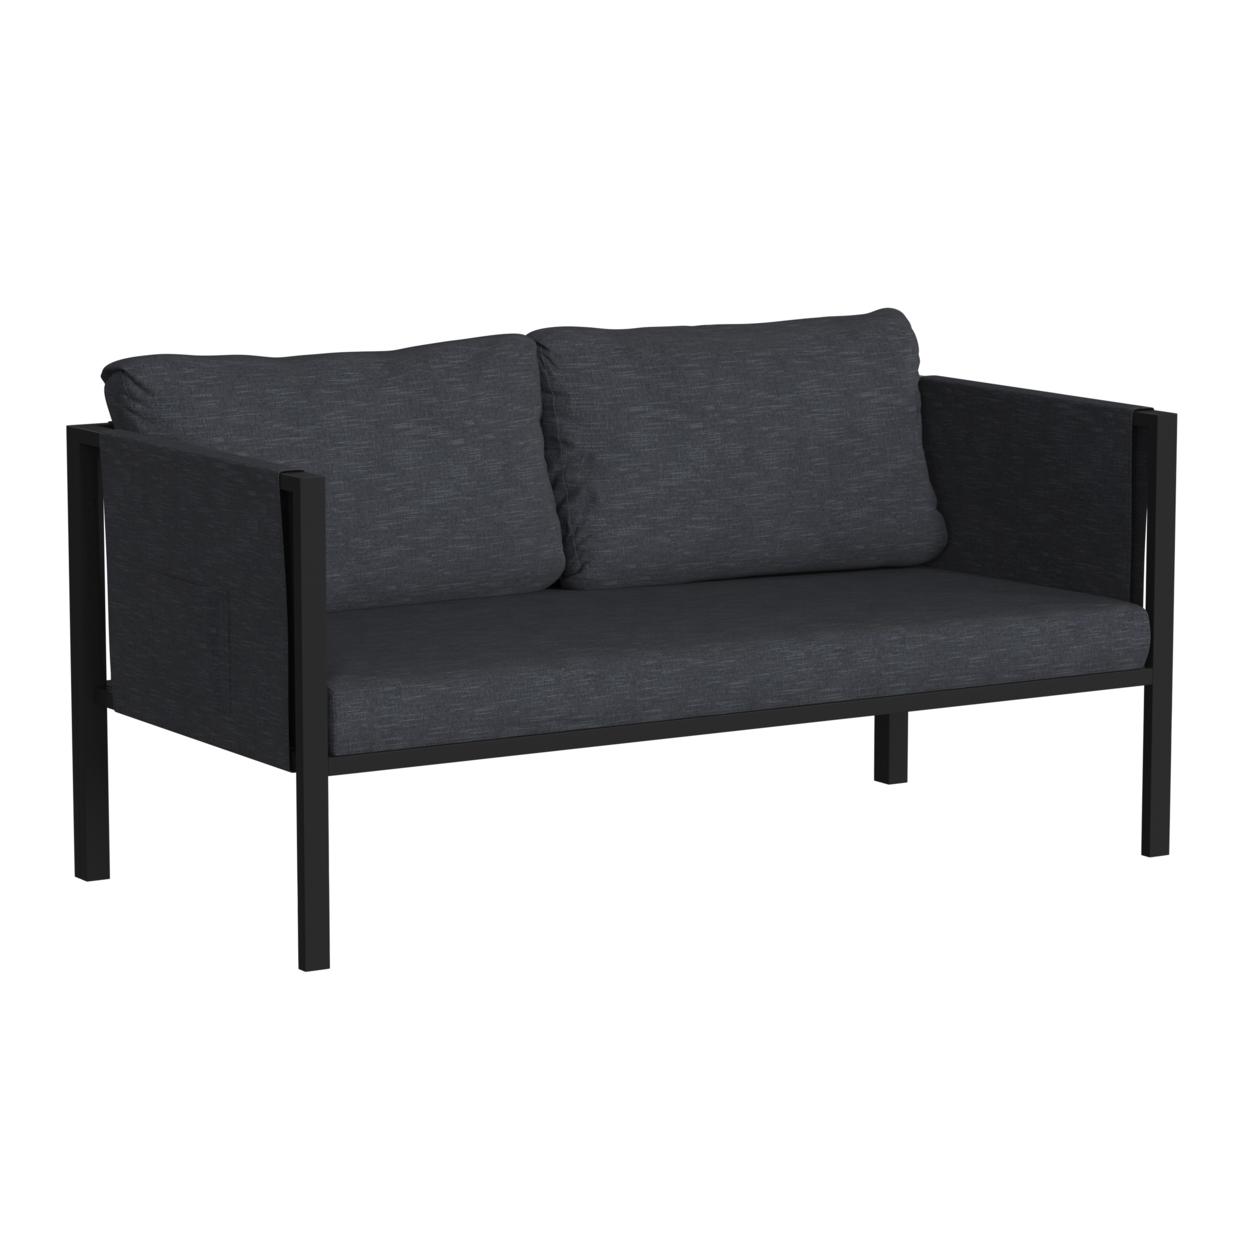 Indooroutdoor Loveseat With Cushions Modern Steel Framed Chair With Storage Pockets, Black With Charcoal Cushions